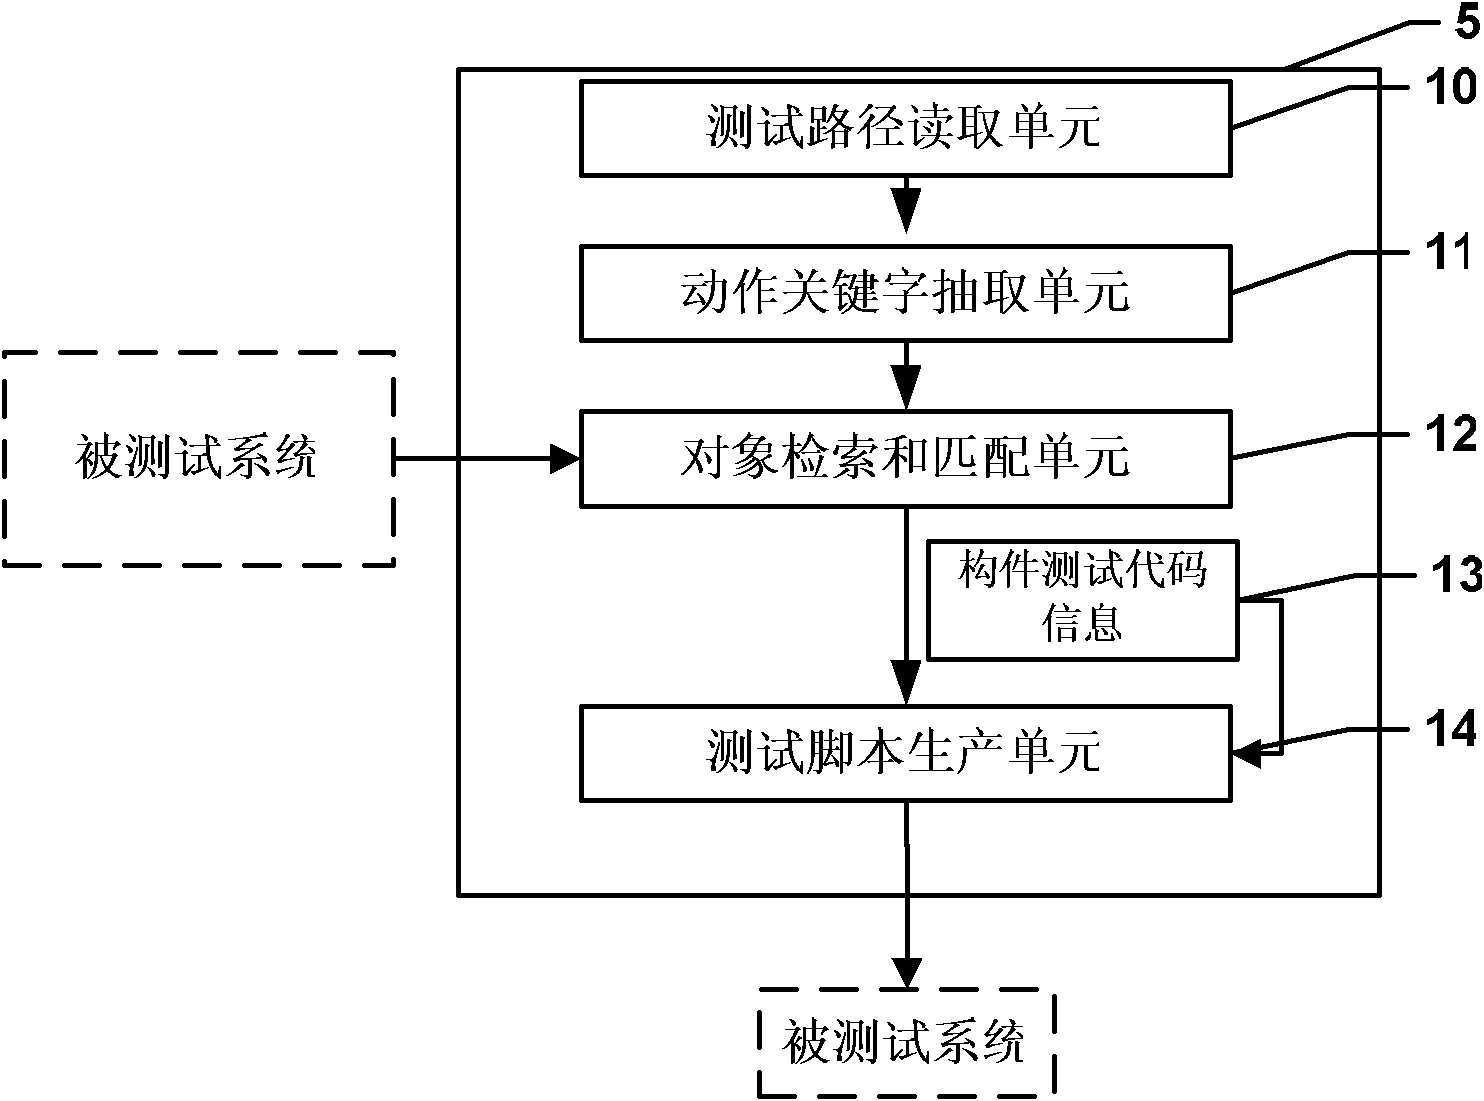 Device and method for automatically testing software based on UML (unified modeling language) graphs